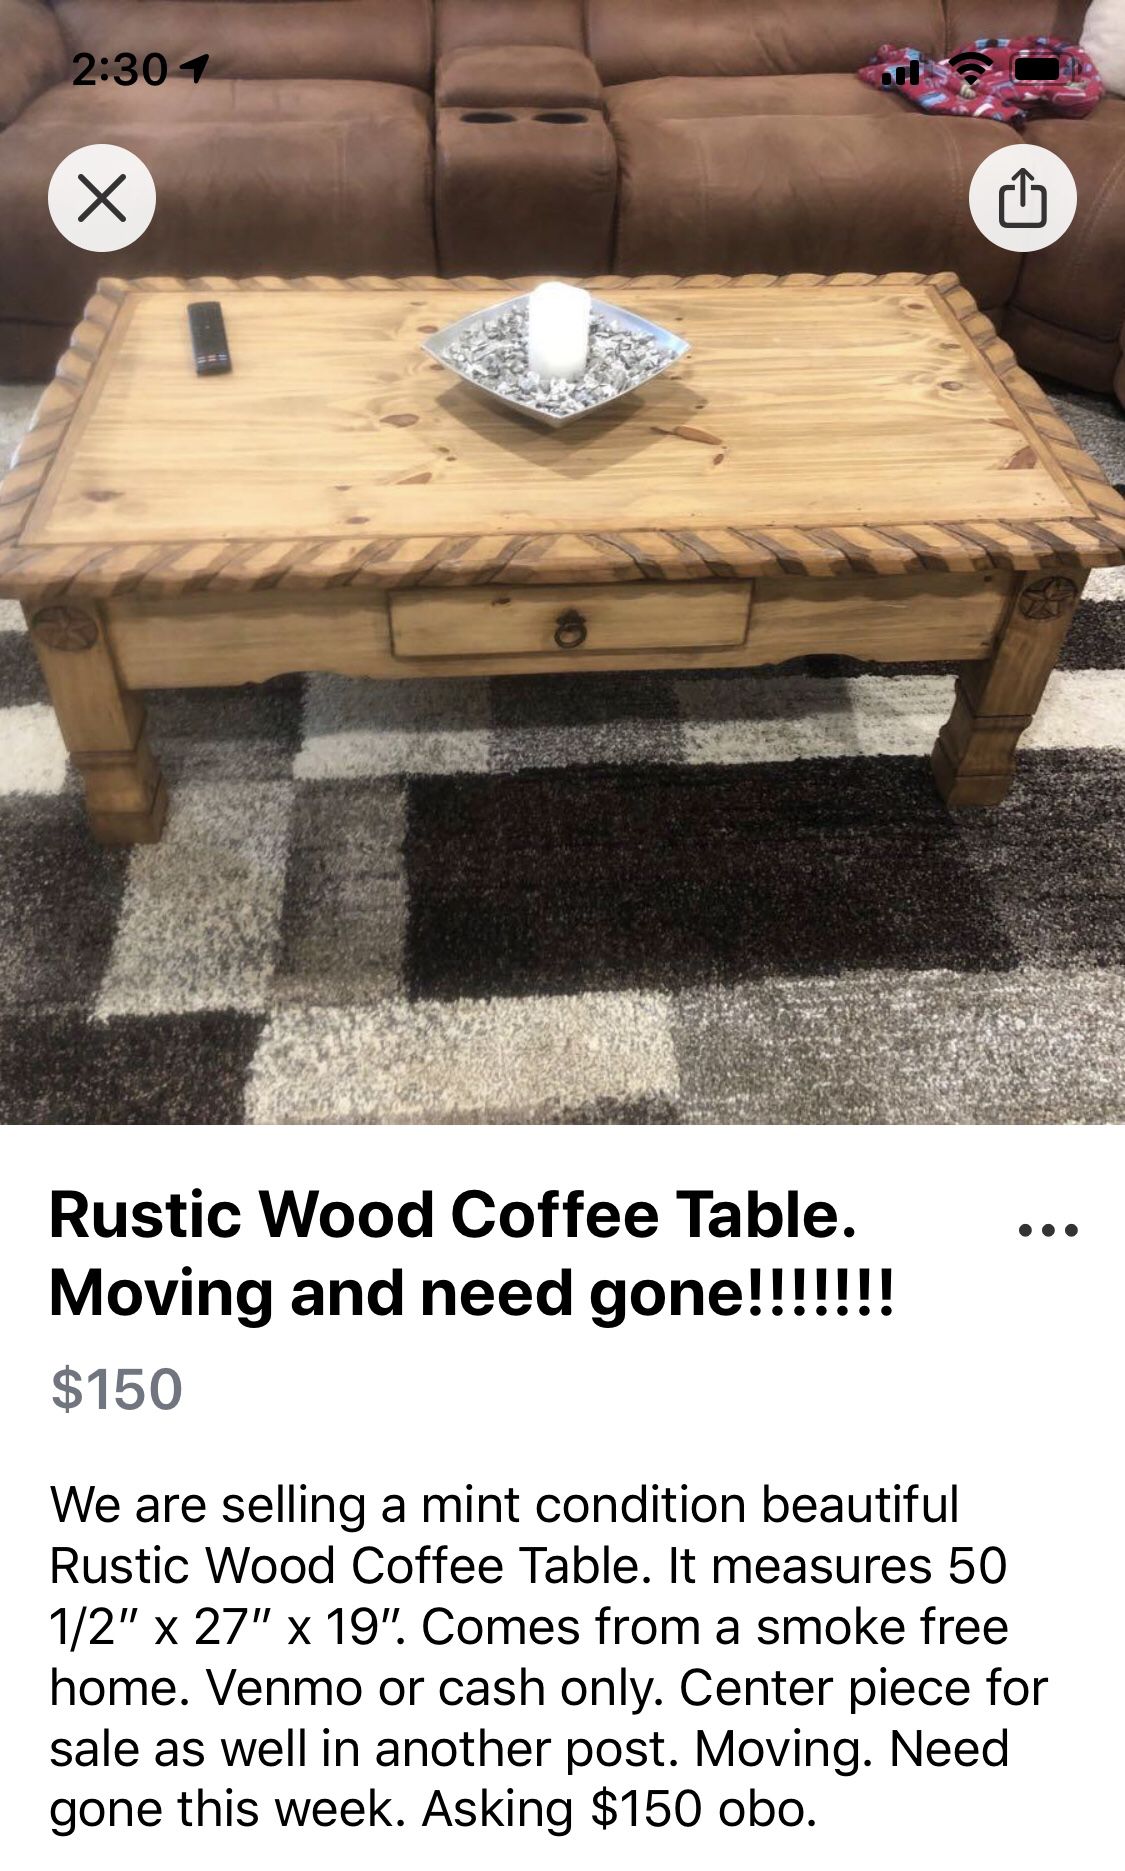 Reduced. Moving need gone this week!!!! Rustic Wood coffee table